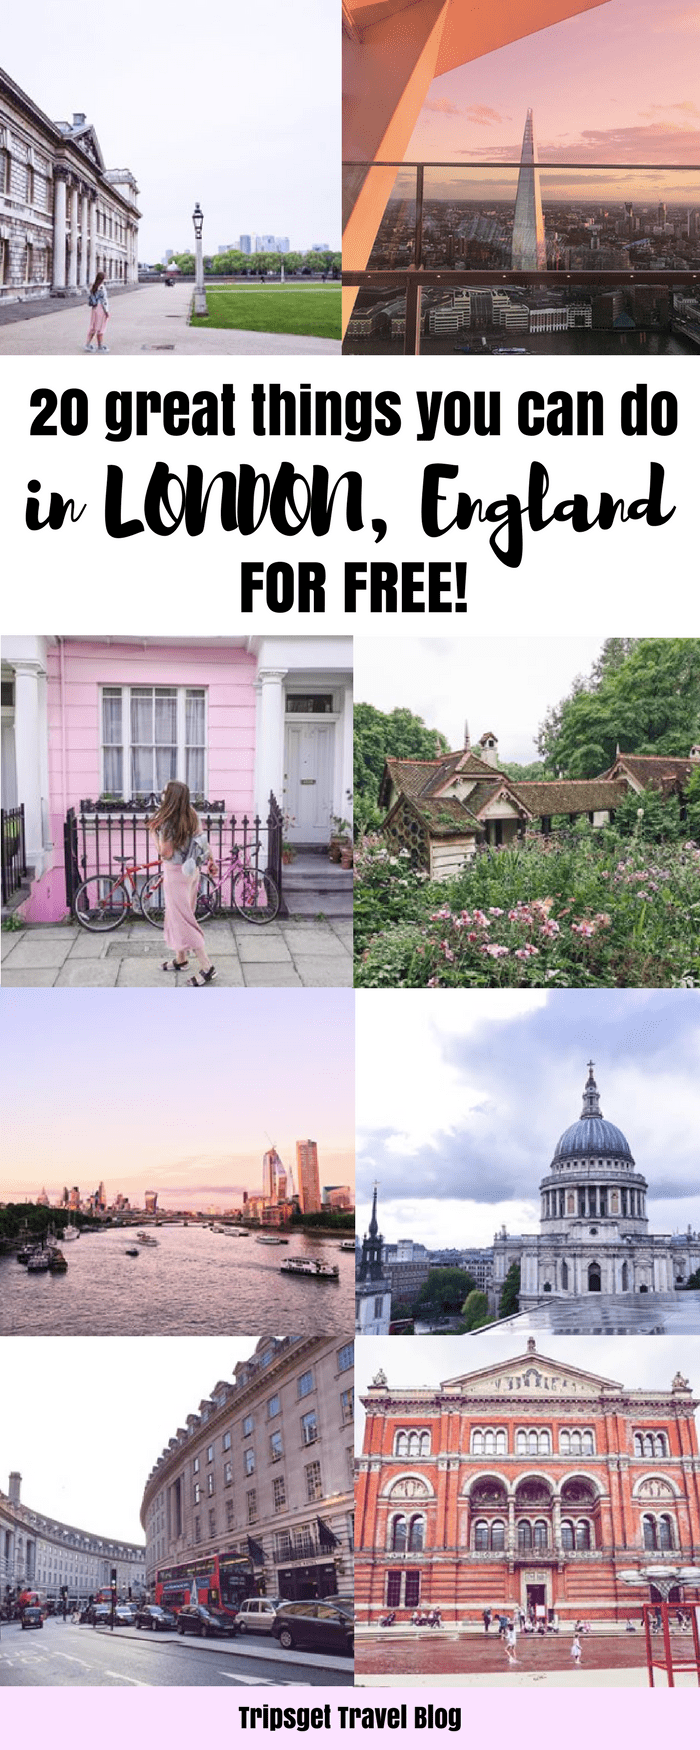 20 amazing things to do in London for free! Free things to do in London, England